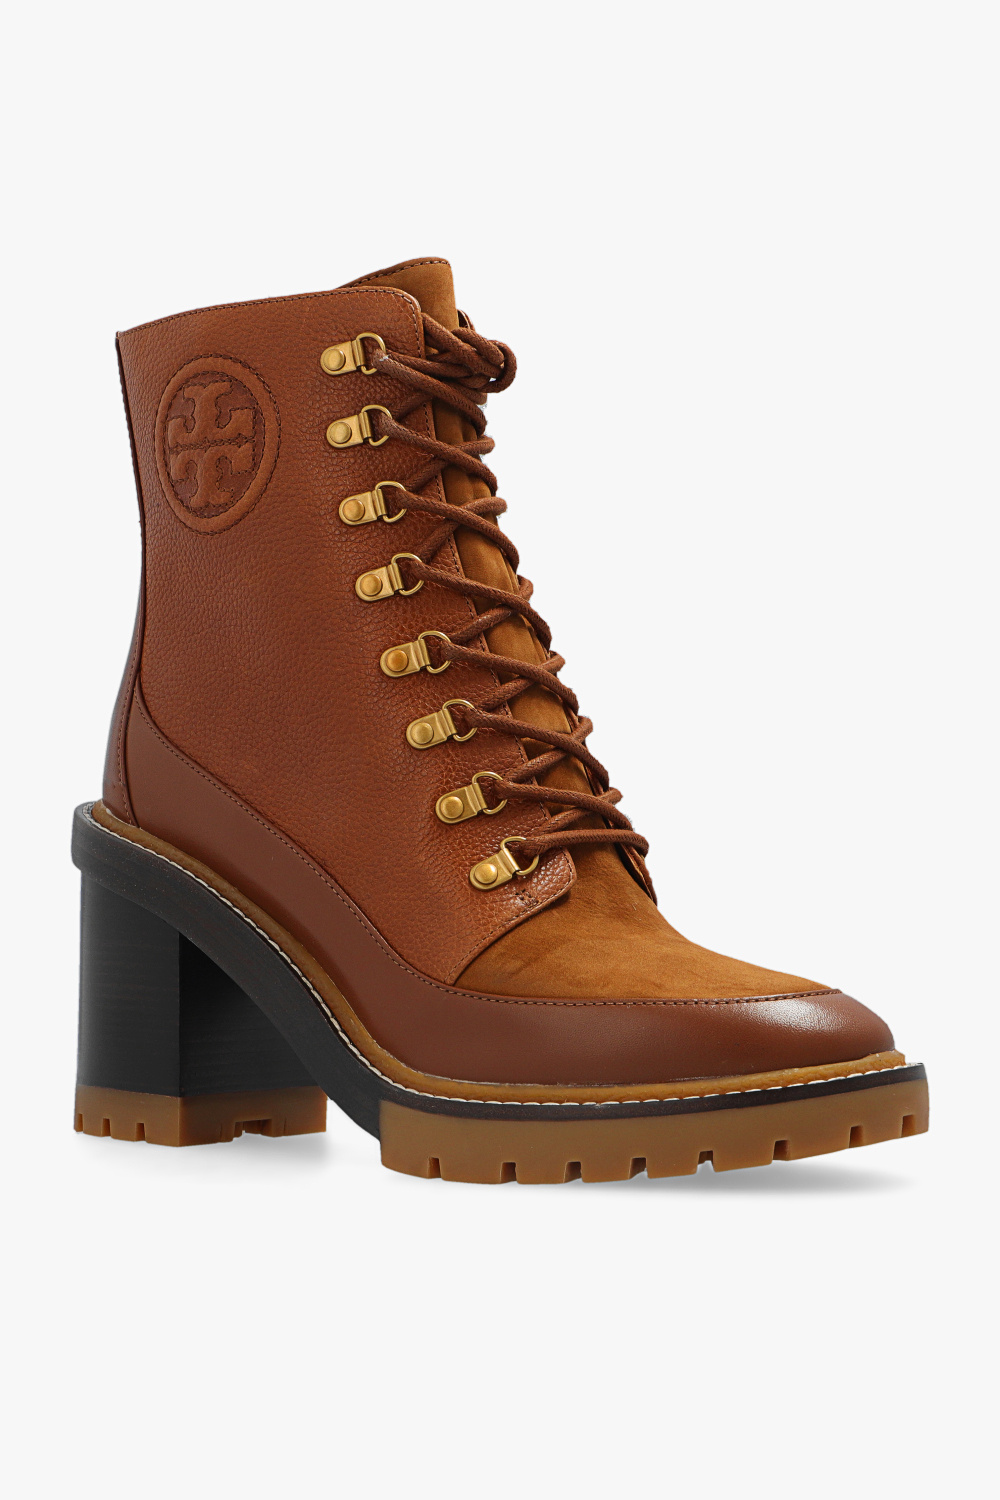 Tory Burch 'Miller' heeled ankle boots | Women's Shoes | Vitkac